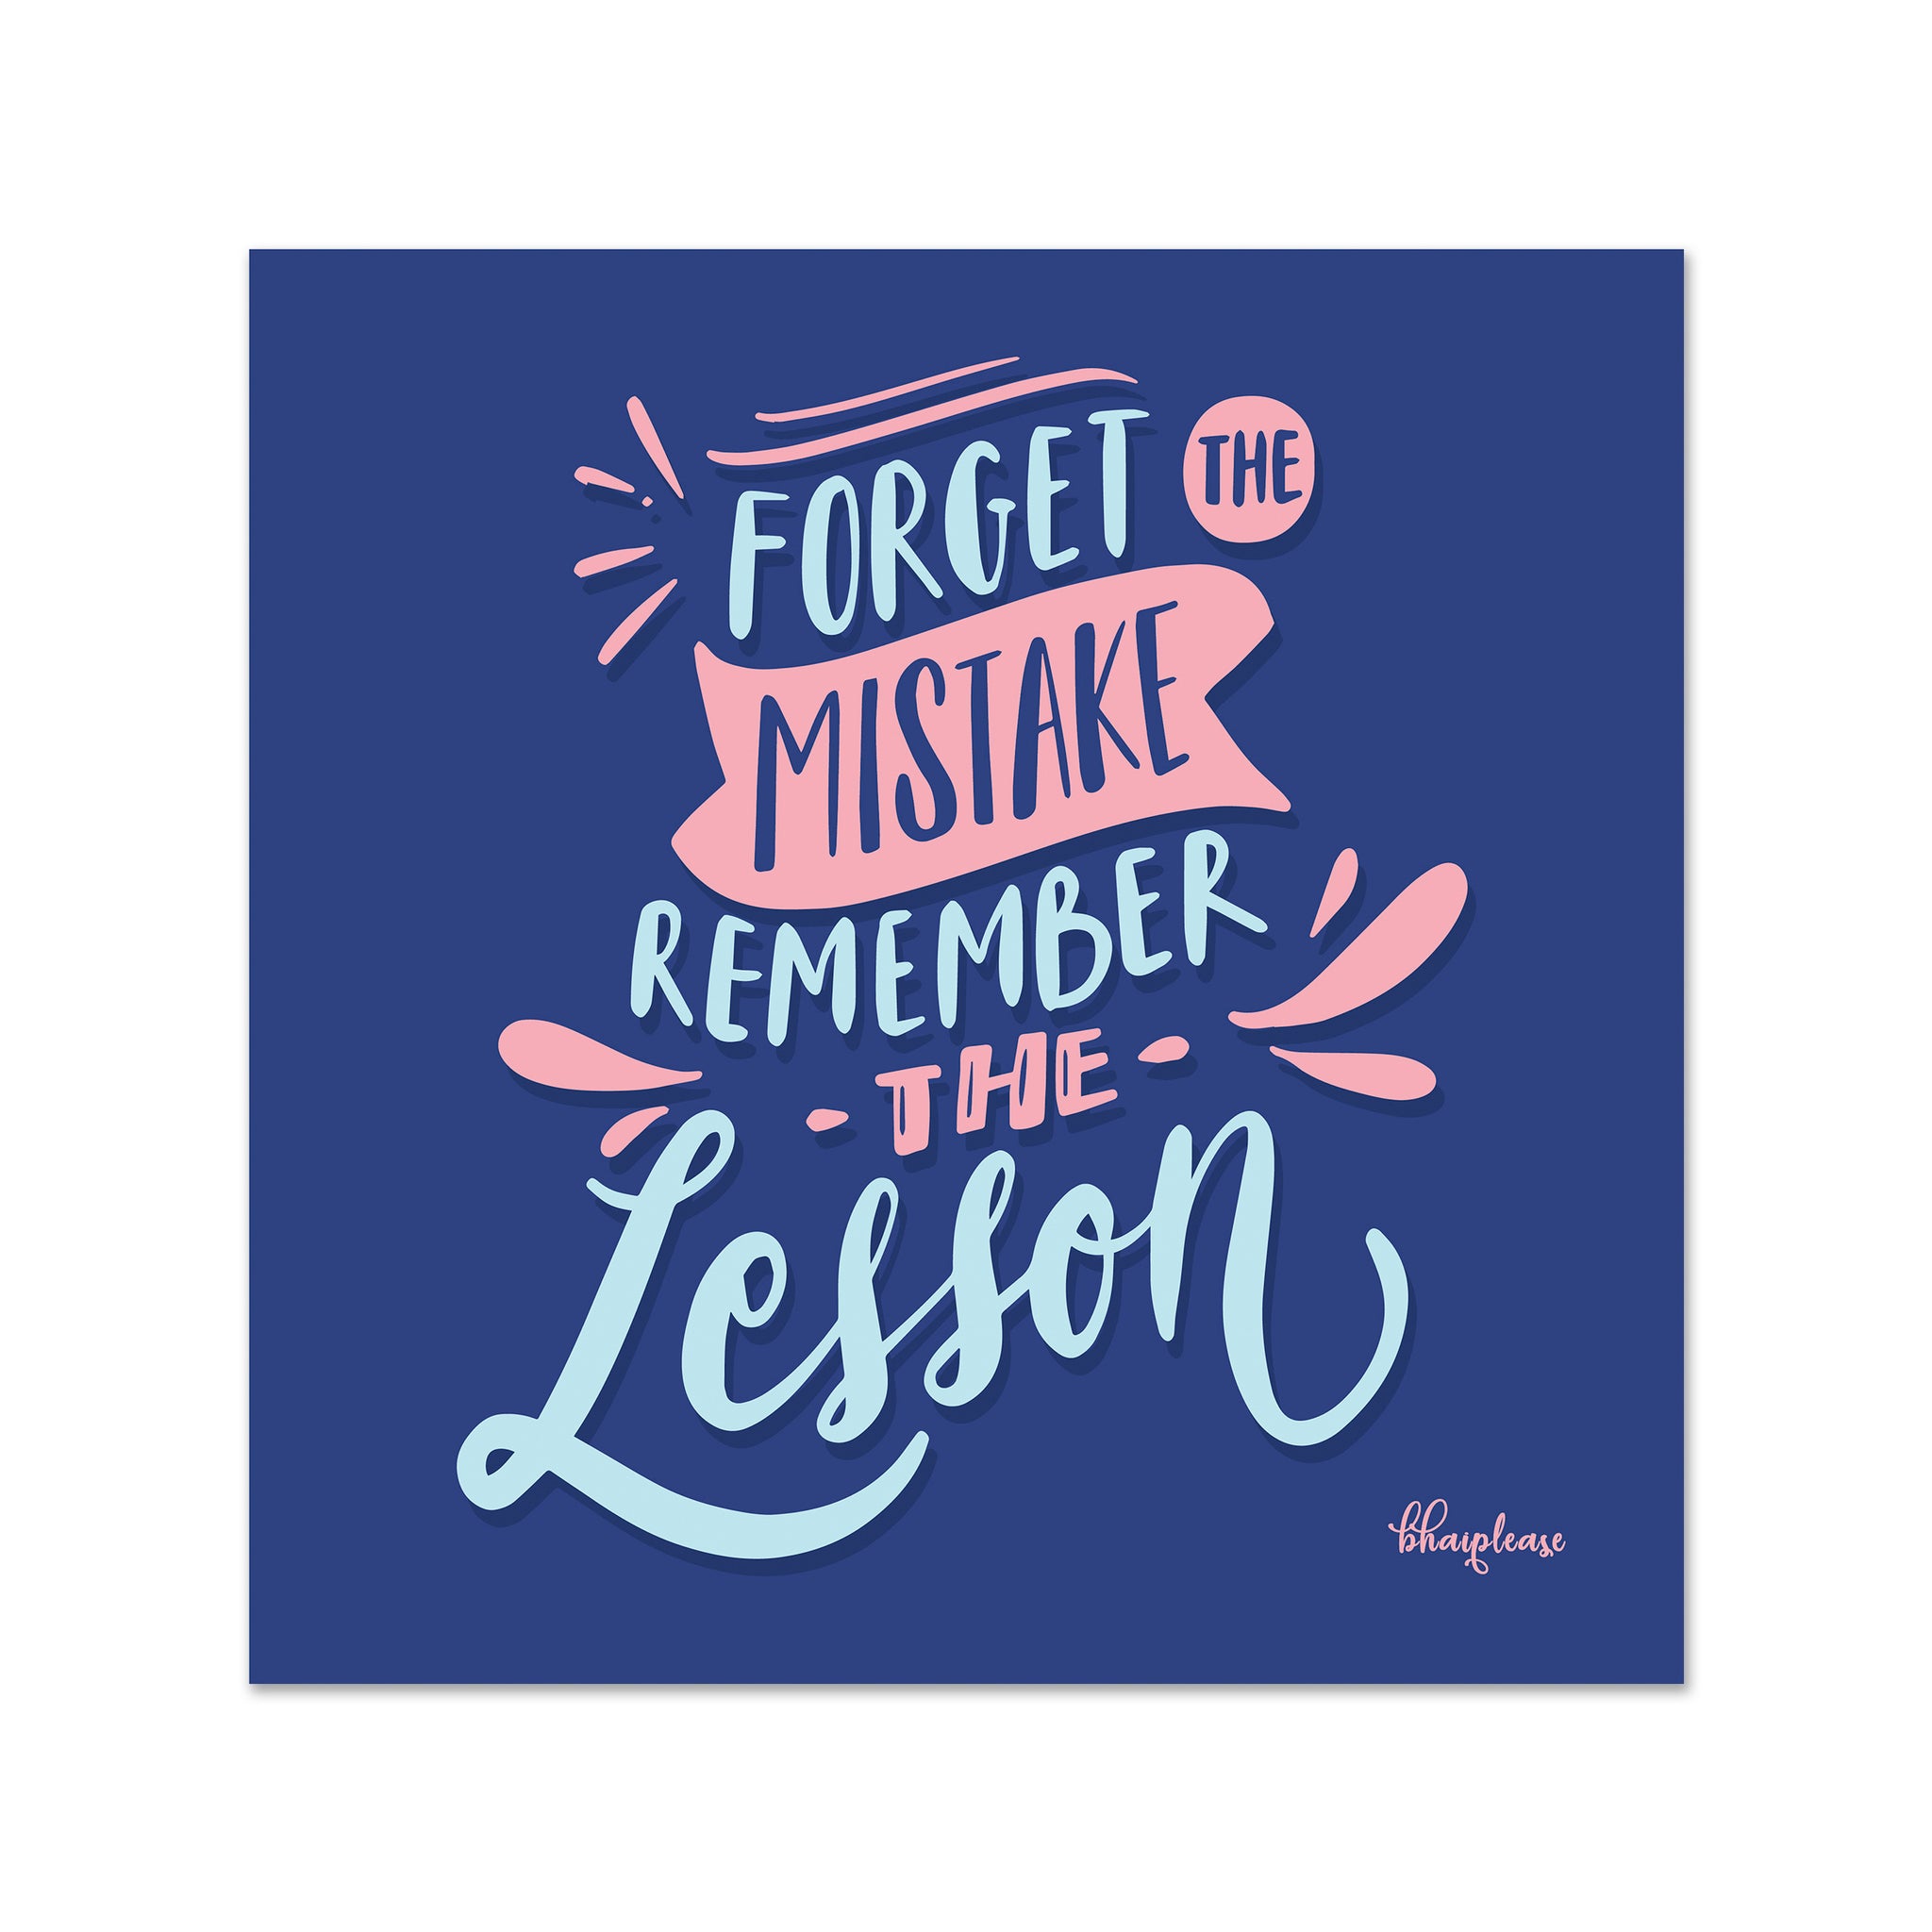 Forget The Mistake Remember The Lesson Wooden Fridge / Refrigerator Magnet